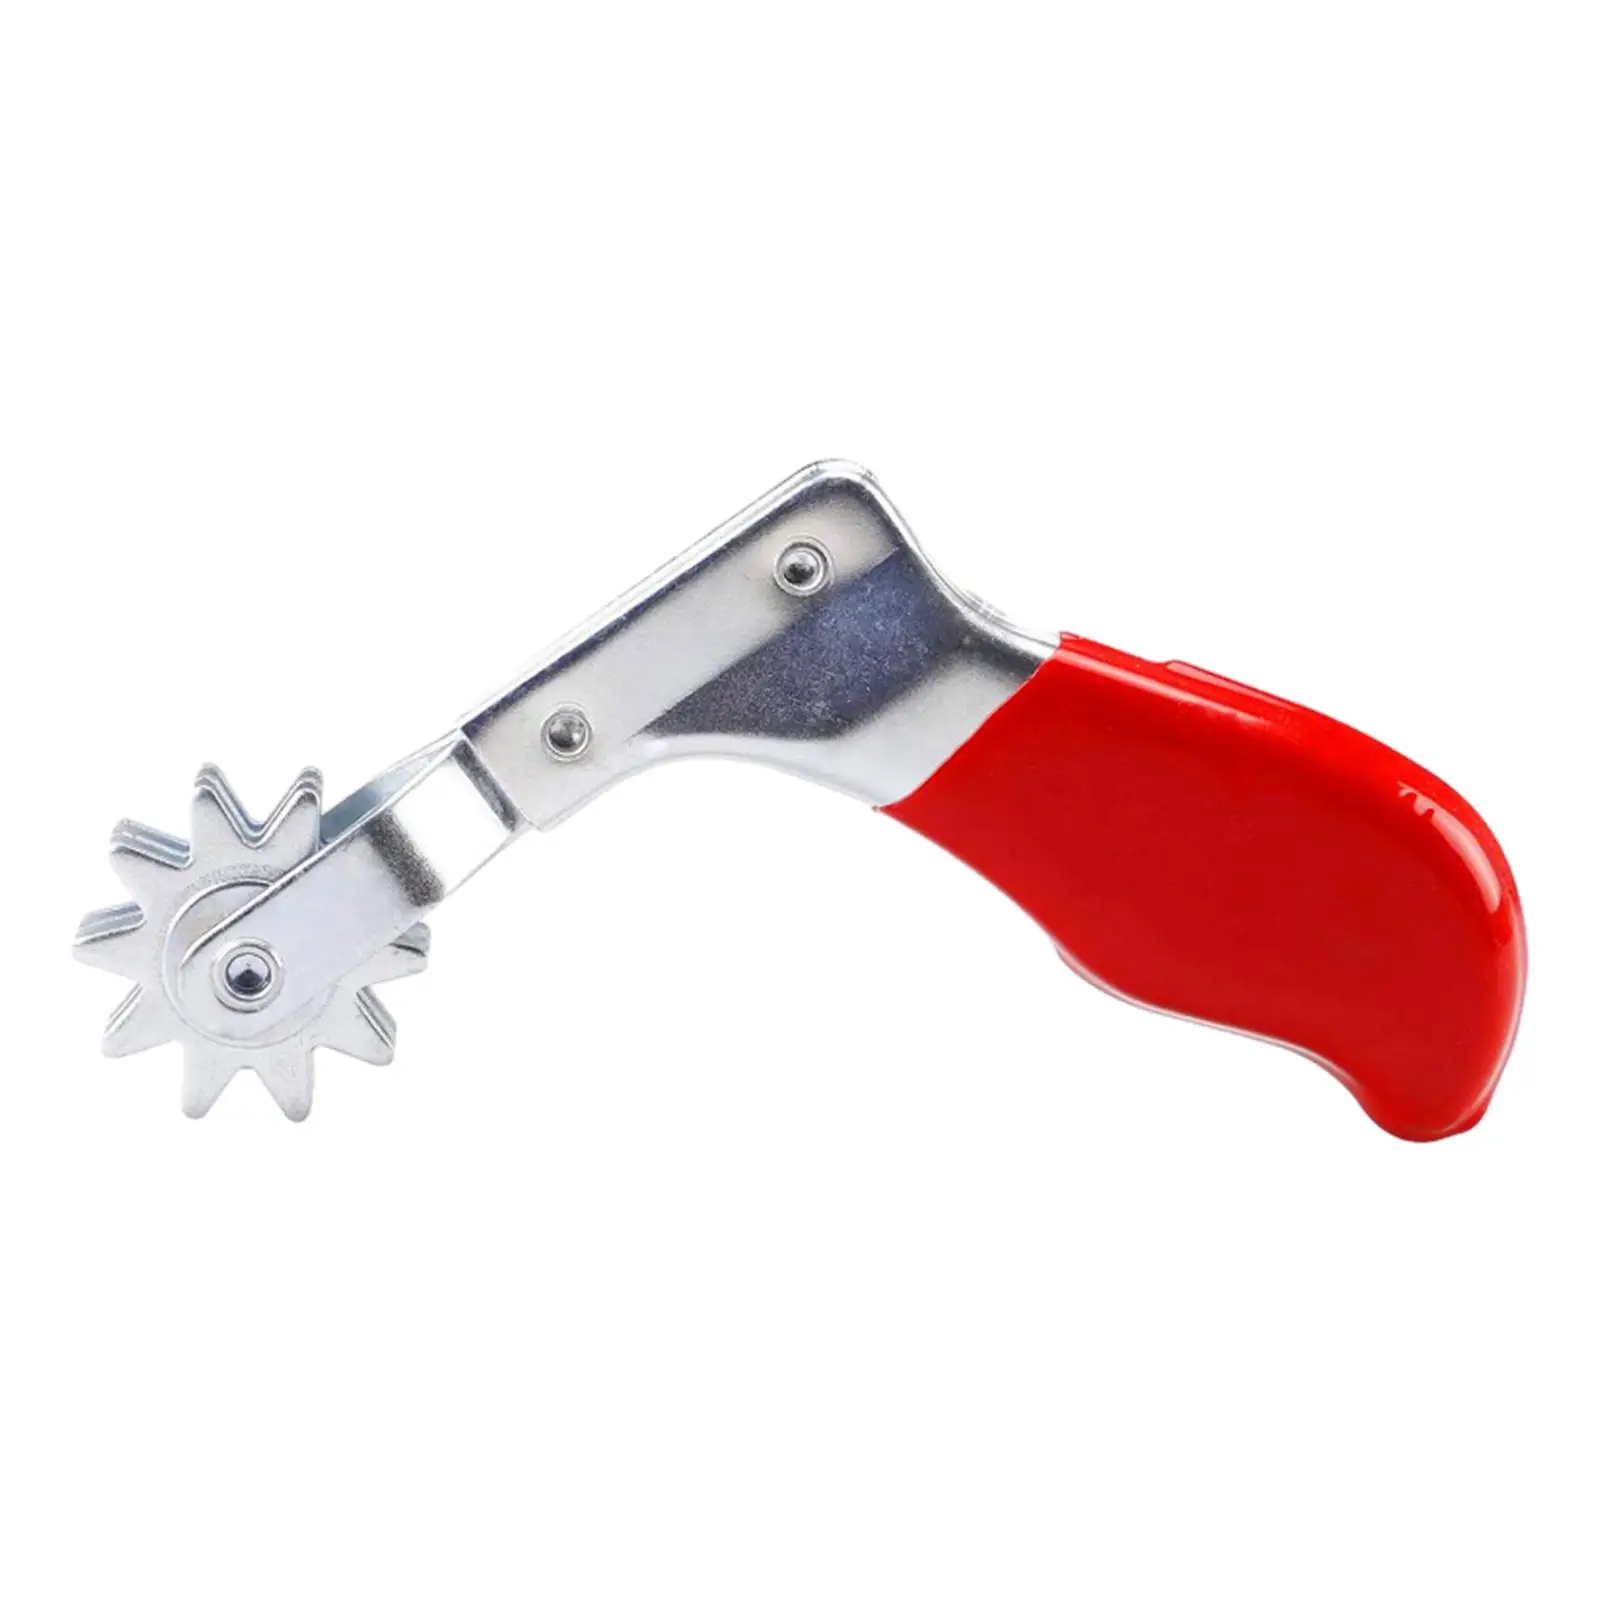 Polishing Pad Cleaning Spur Tool Bonnet Cleaning Tool, Handheld, Easy to Use, Buffing Spur Tool, Polishing Pad Cleaner